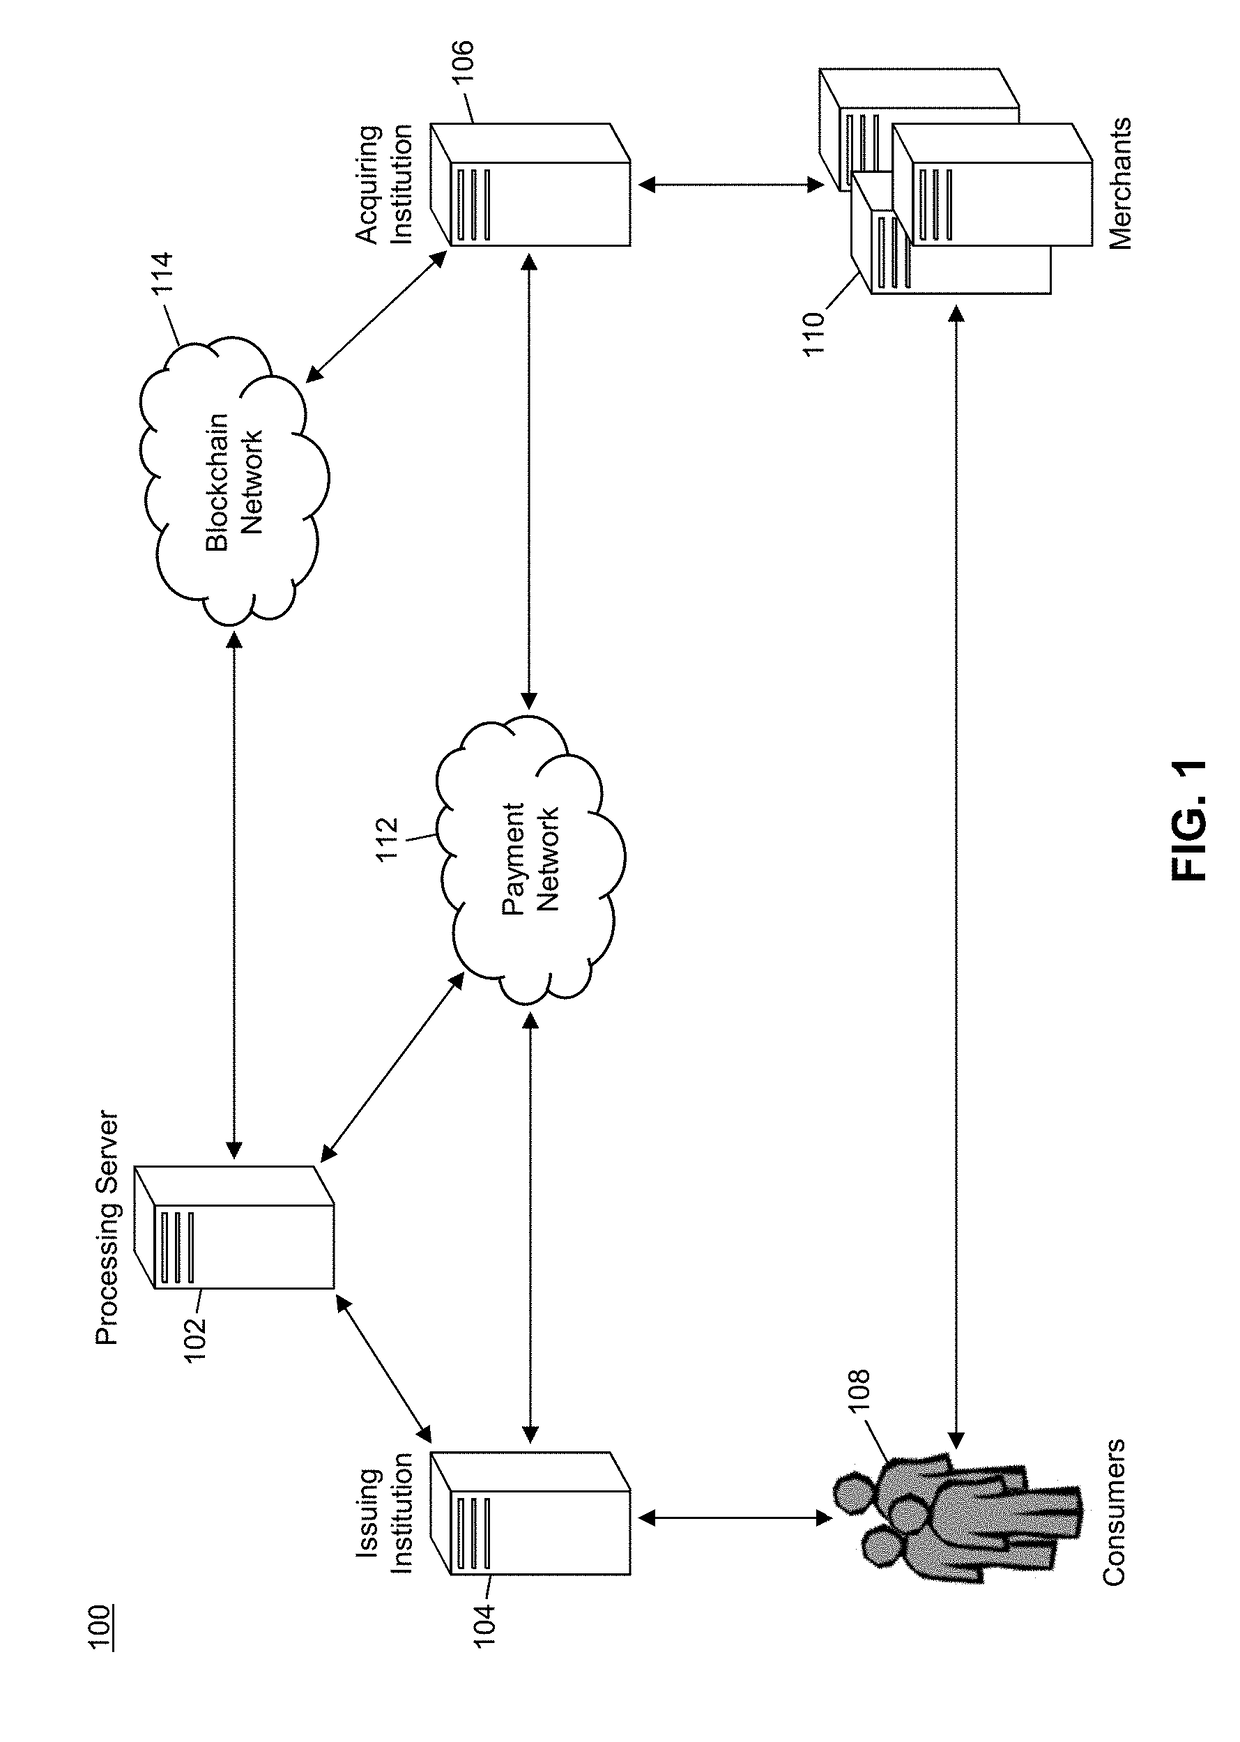 Method and system for net settlement by use of cryptographic promissory notes issued on a blockchain